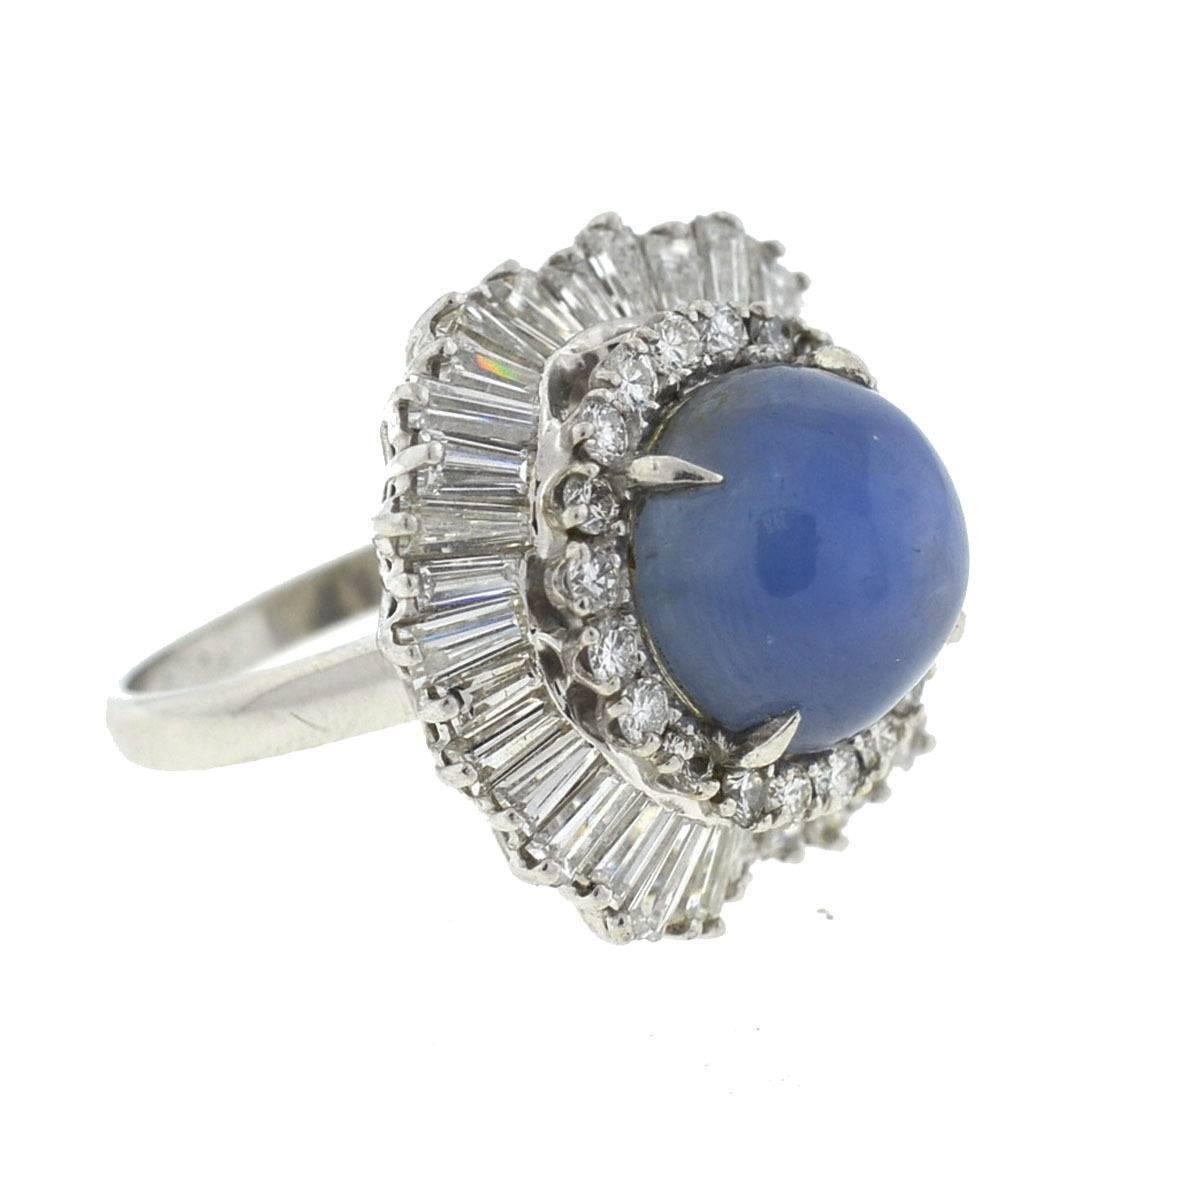 Style - Platinum Vintage Star Sapphire Diamond Ladies Ring
Metal - Platinum
Stones - Diamonds (approx. 3.85cts tw) Star Sapphire (approx. 11.85mm)
Size - 5
Weight - 18 grams
Includes - Ring Only